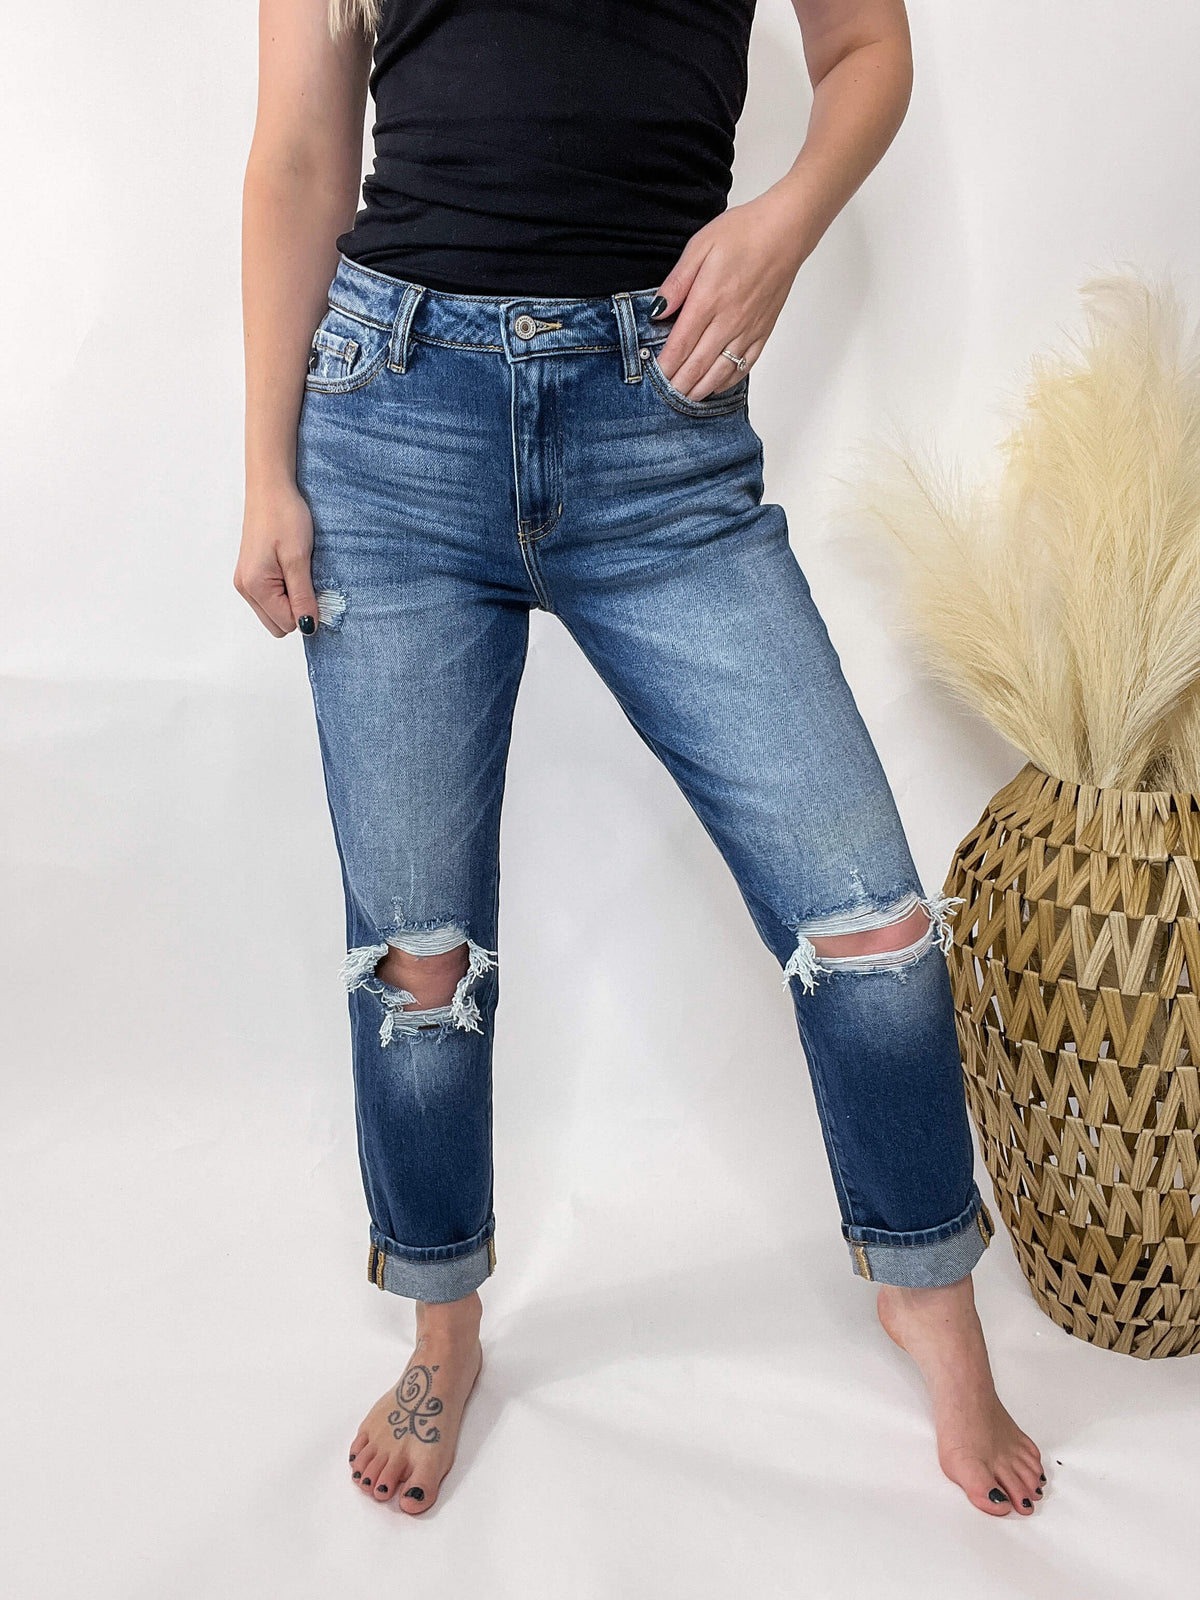 Dark Wash KanCan Distressed Mom Jeans Comfort Stretch 99% Cotton, 1% Spandex 10.5" Rise, 26" Inseam (After 2" Single Fold)